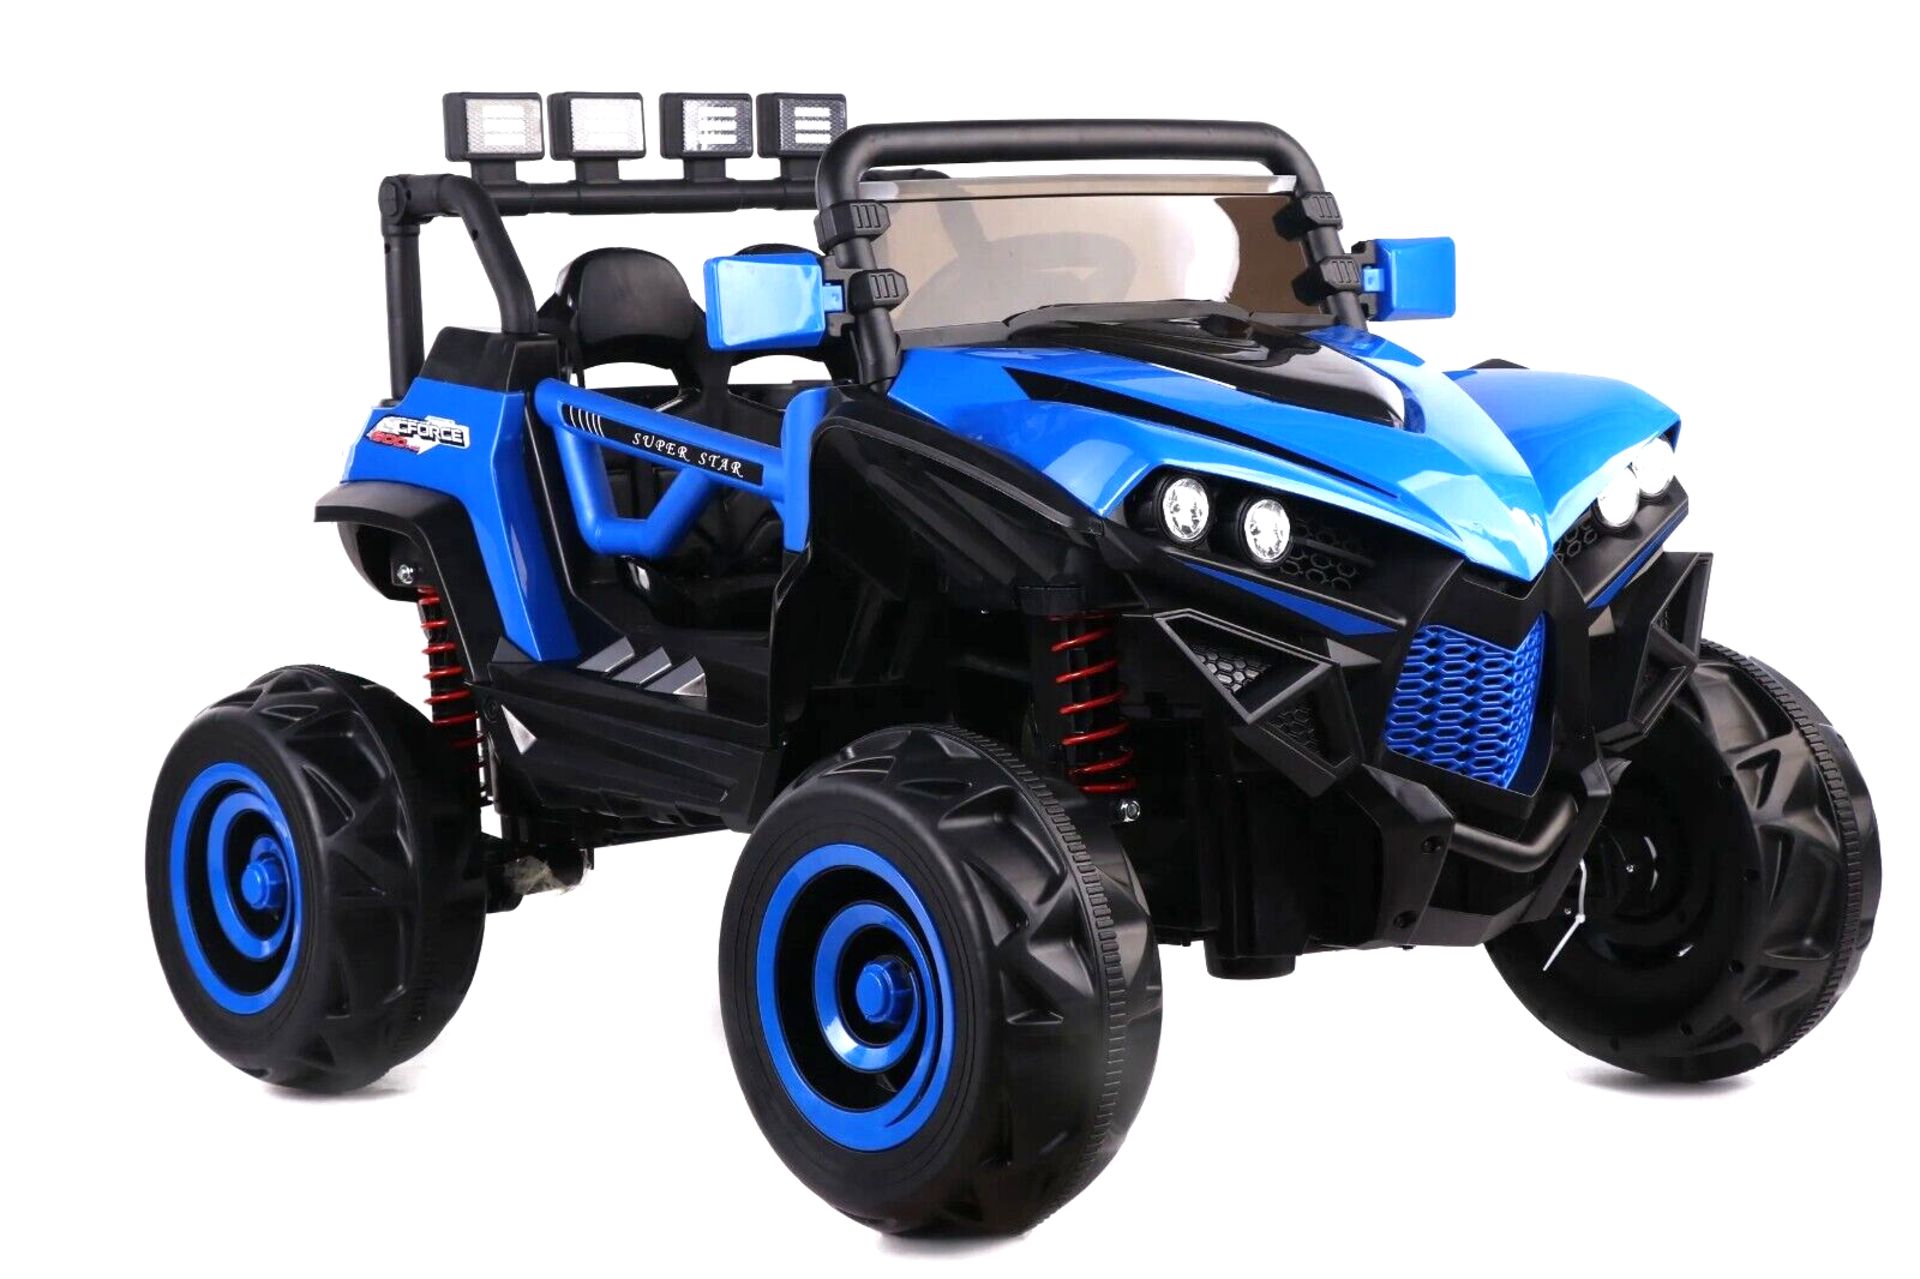 BLUE 4X4 ATV/UTV KIDS BUGGY JEEP ELECTRIC CAR WITH REMOTE BRAND NEW BOXED - Image 2 of 5